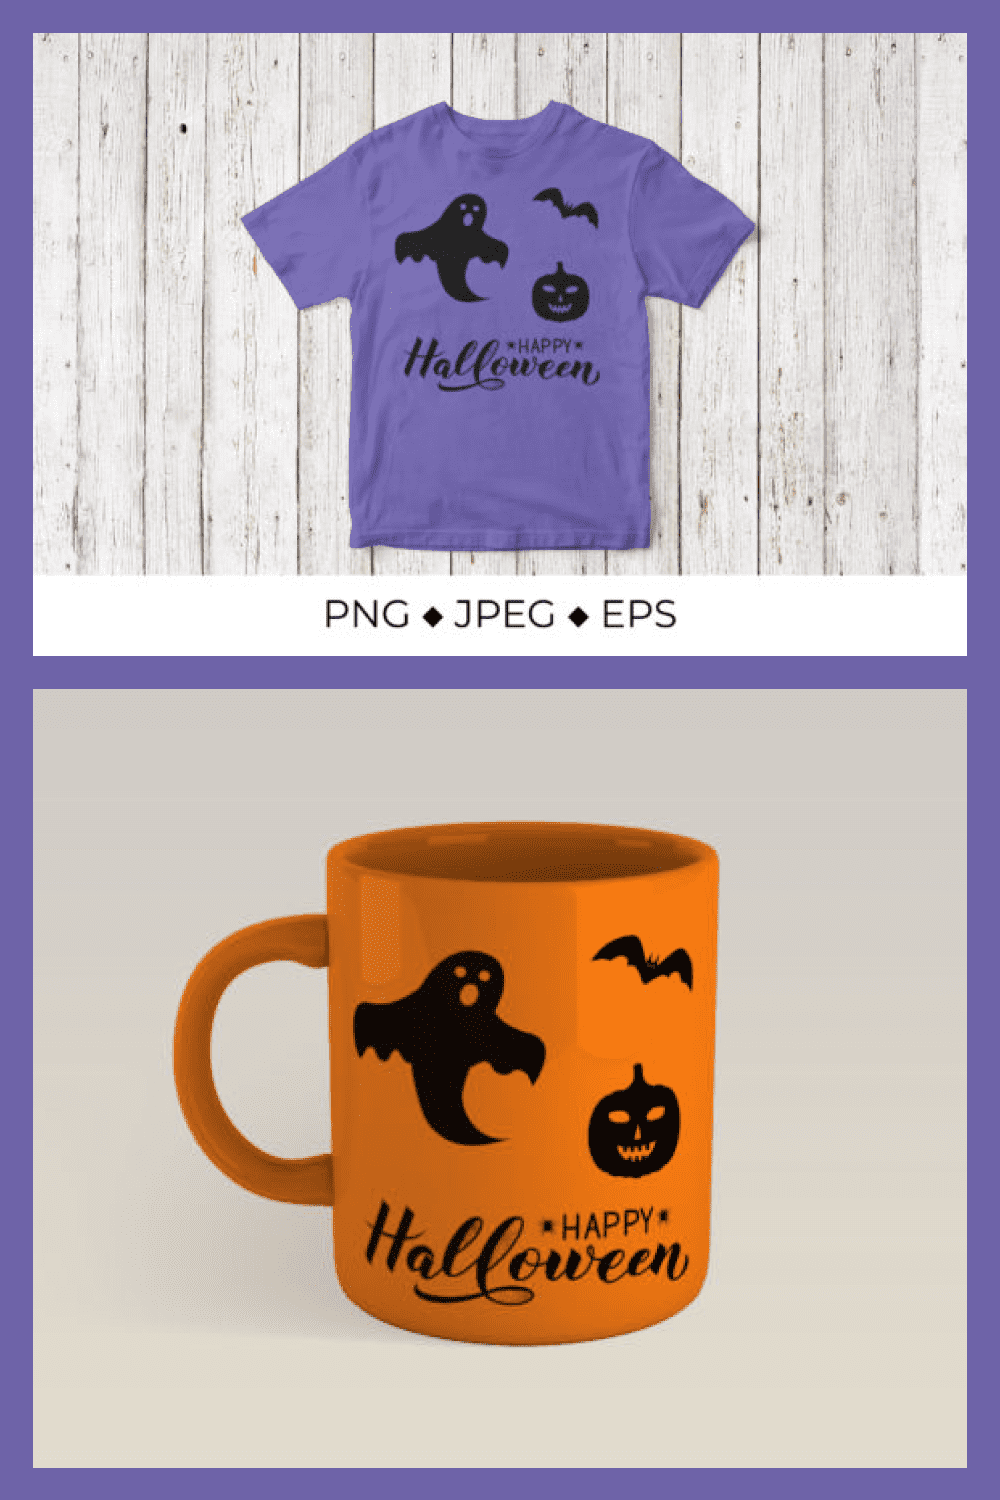 Your Halloween mood should be displayed on all things.